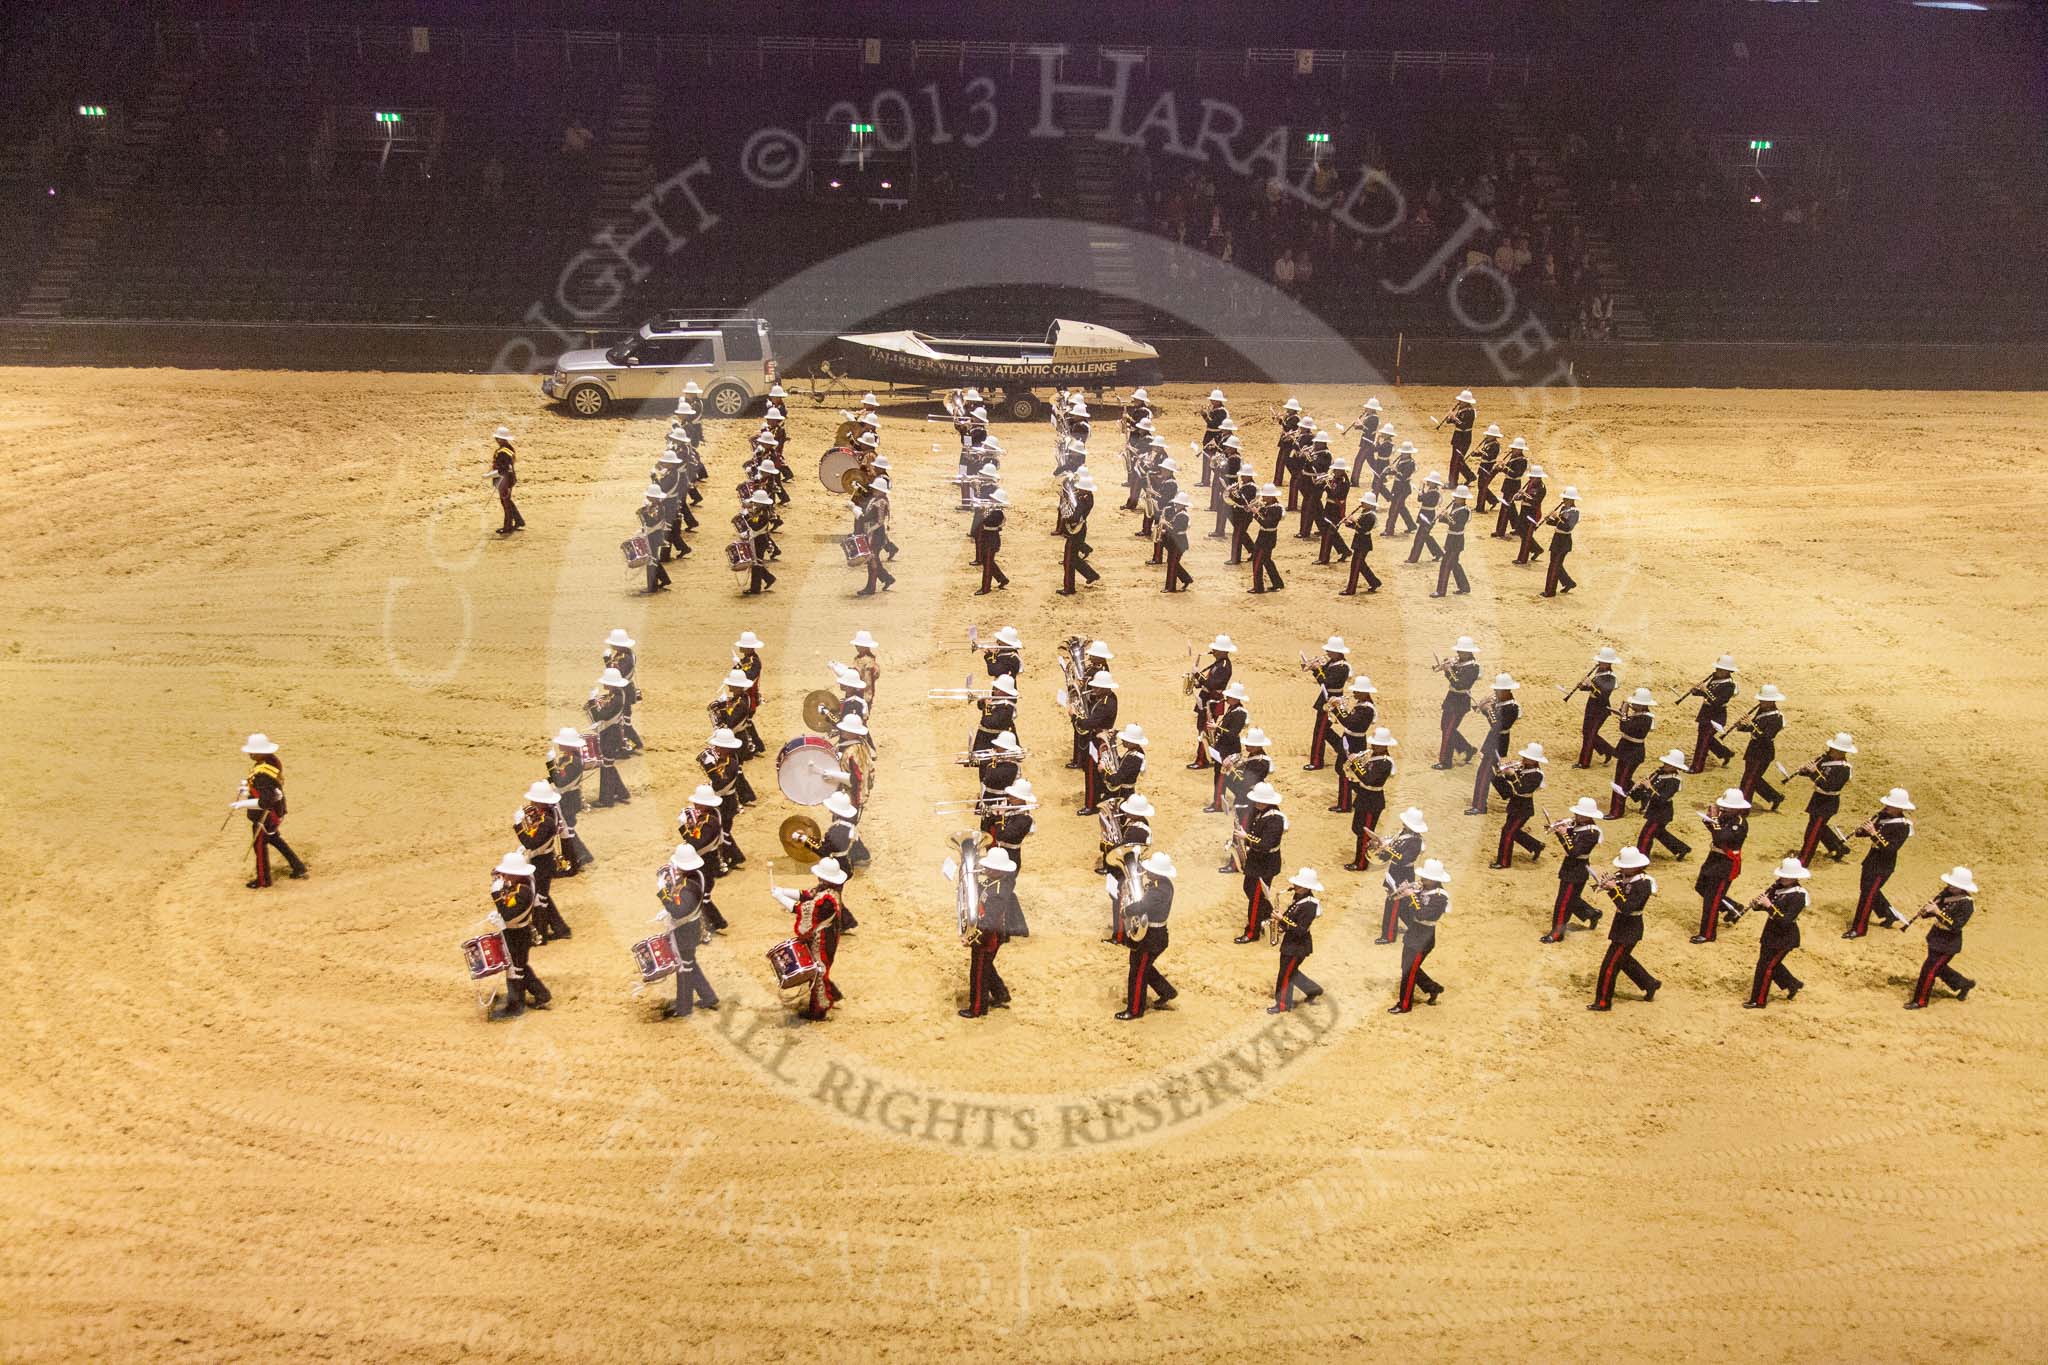 British Military Tournament 2013.
Earls Court,
London SW5,

United Kingdom,
on 06 December 2013 at 16:49, image #483